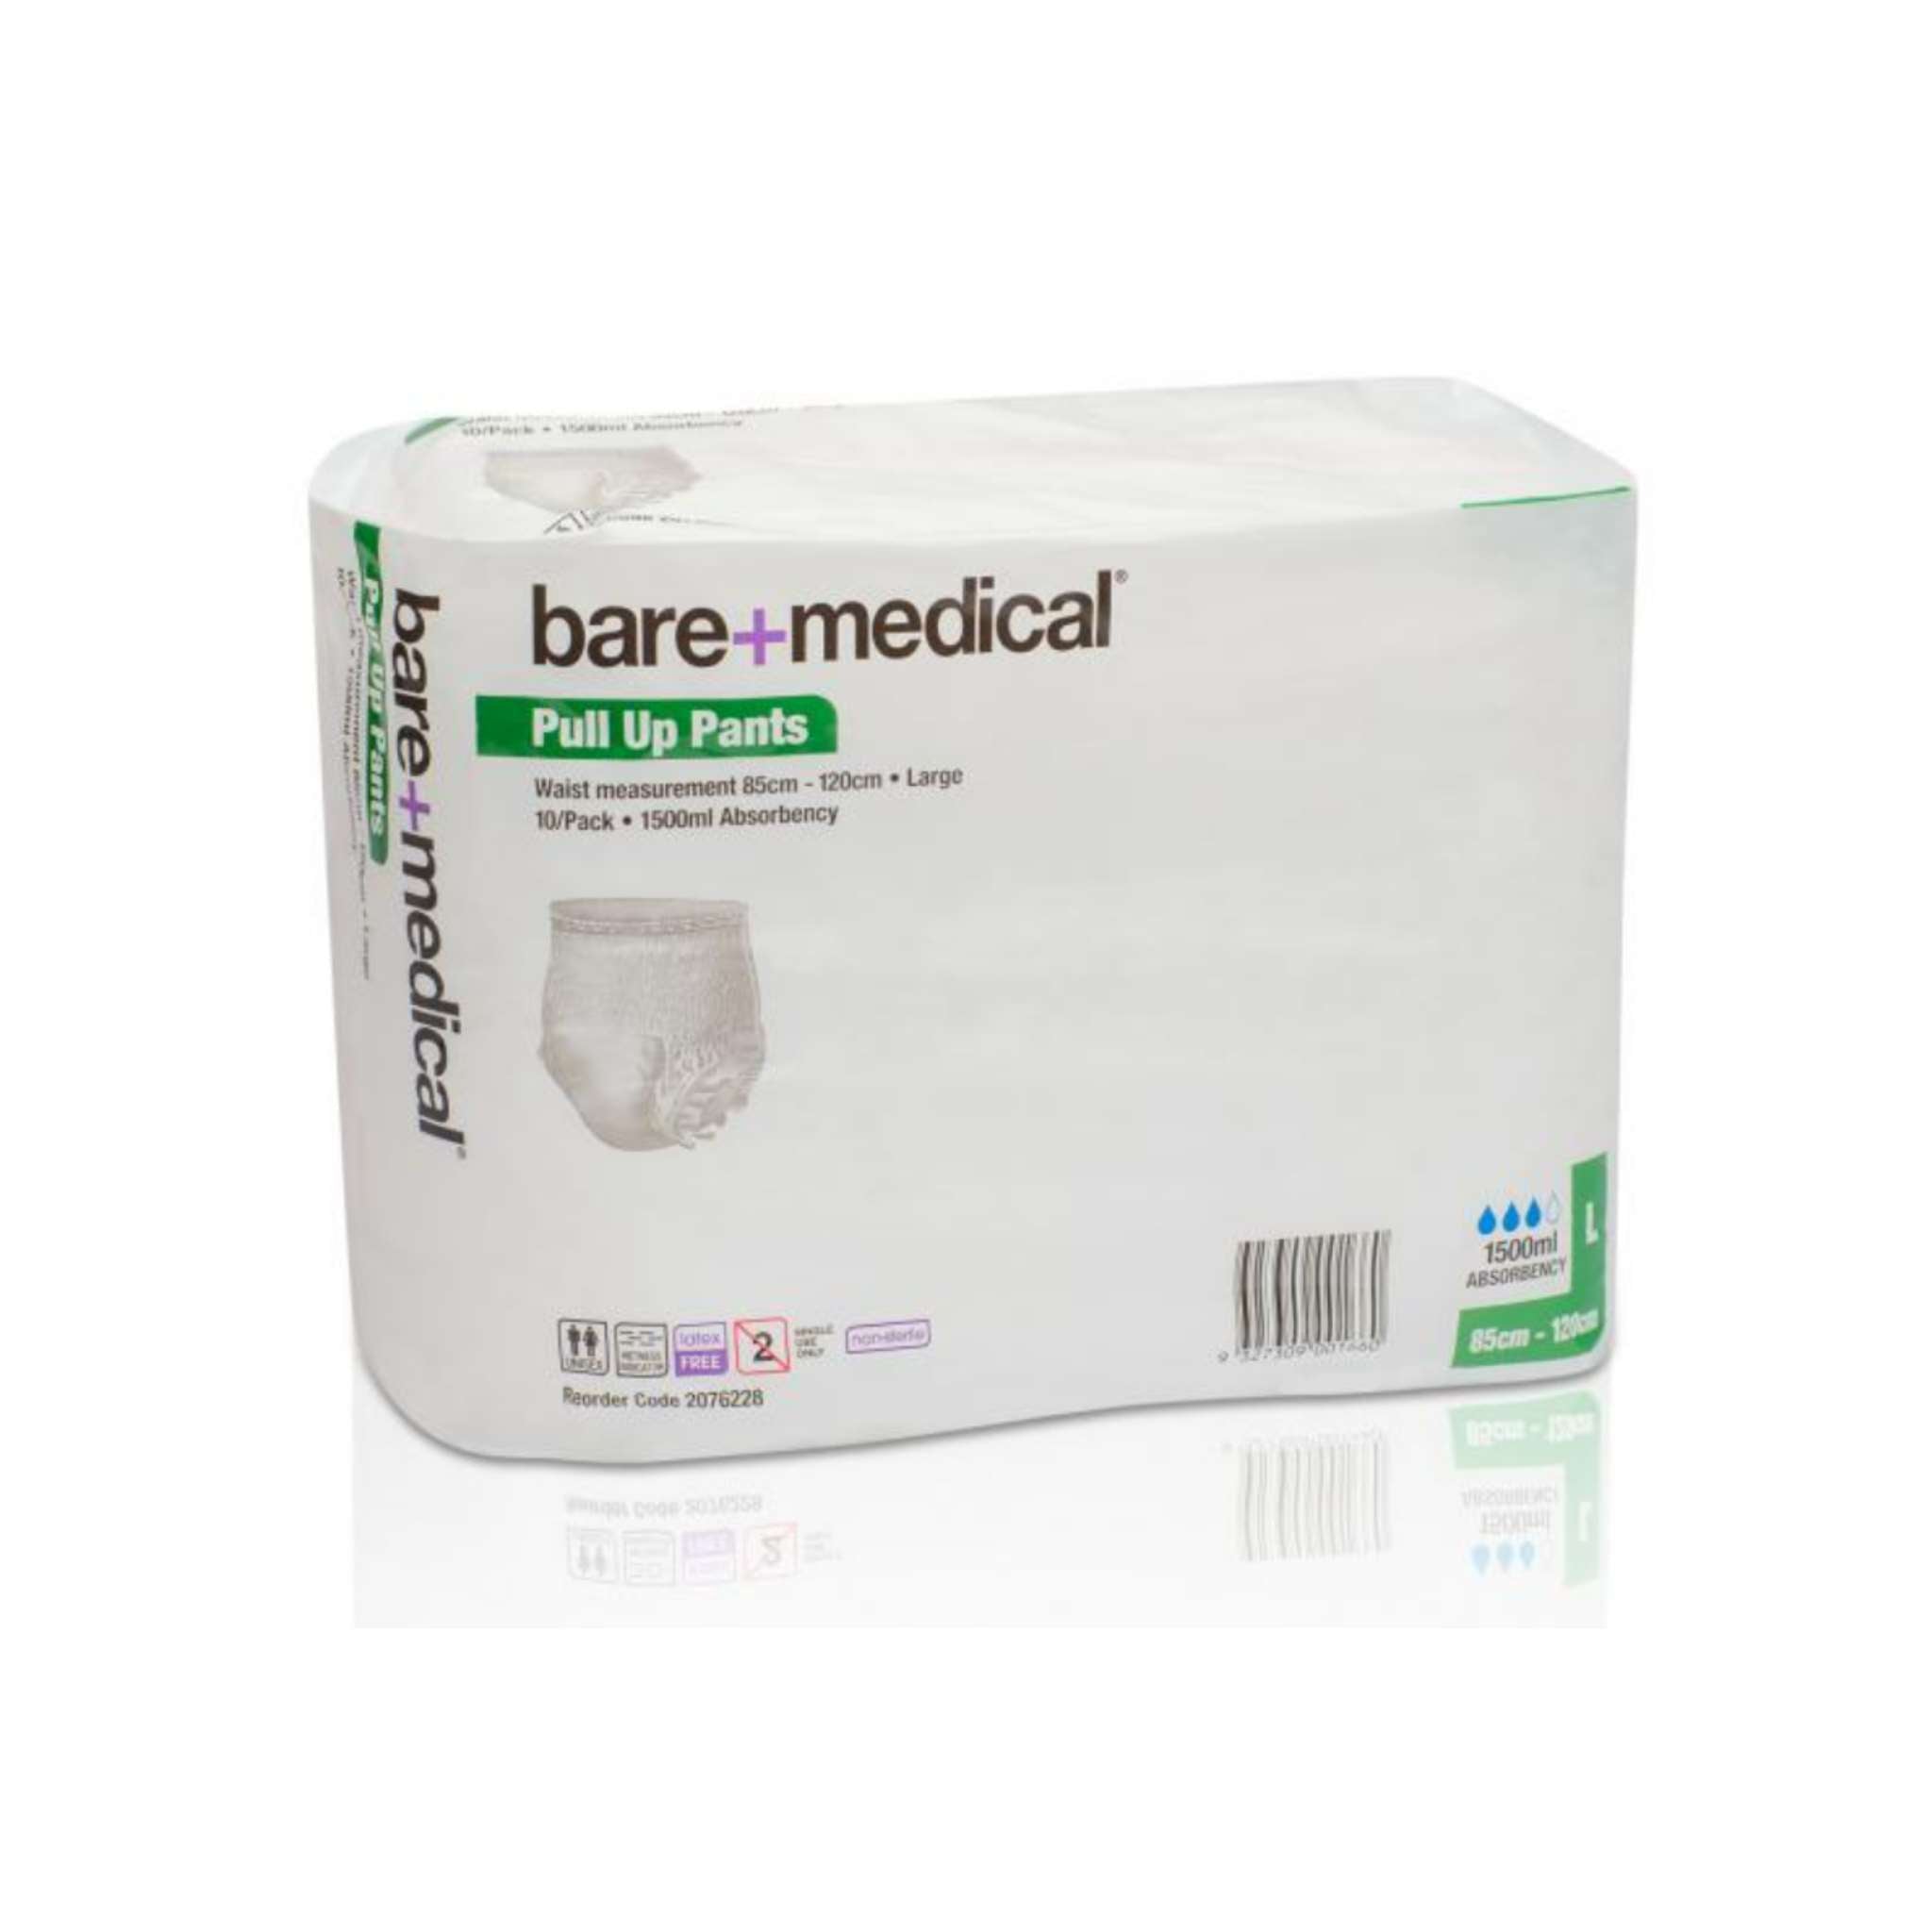 Bare Medical Pull-up Pant 1500ml - Large, Packet